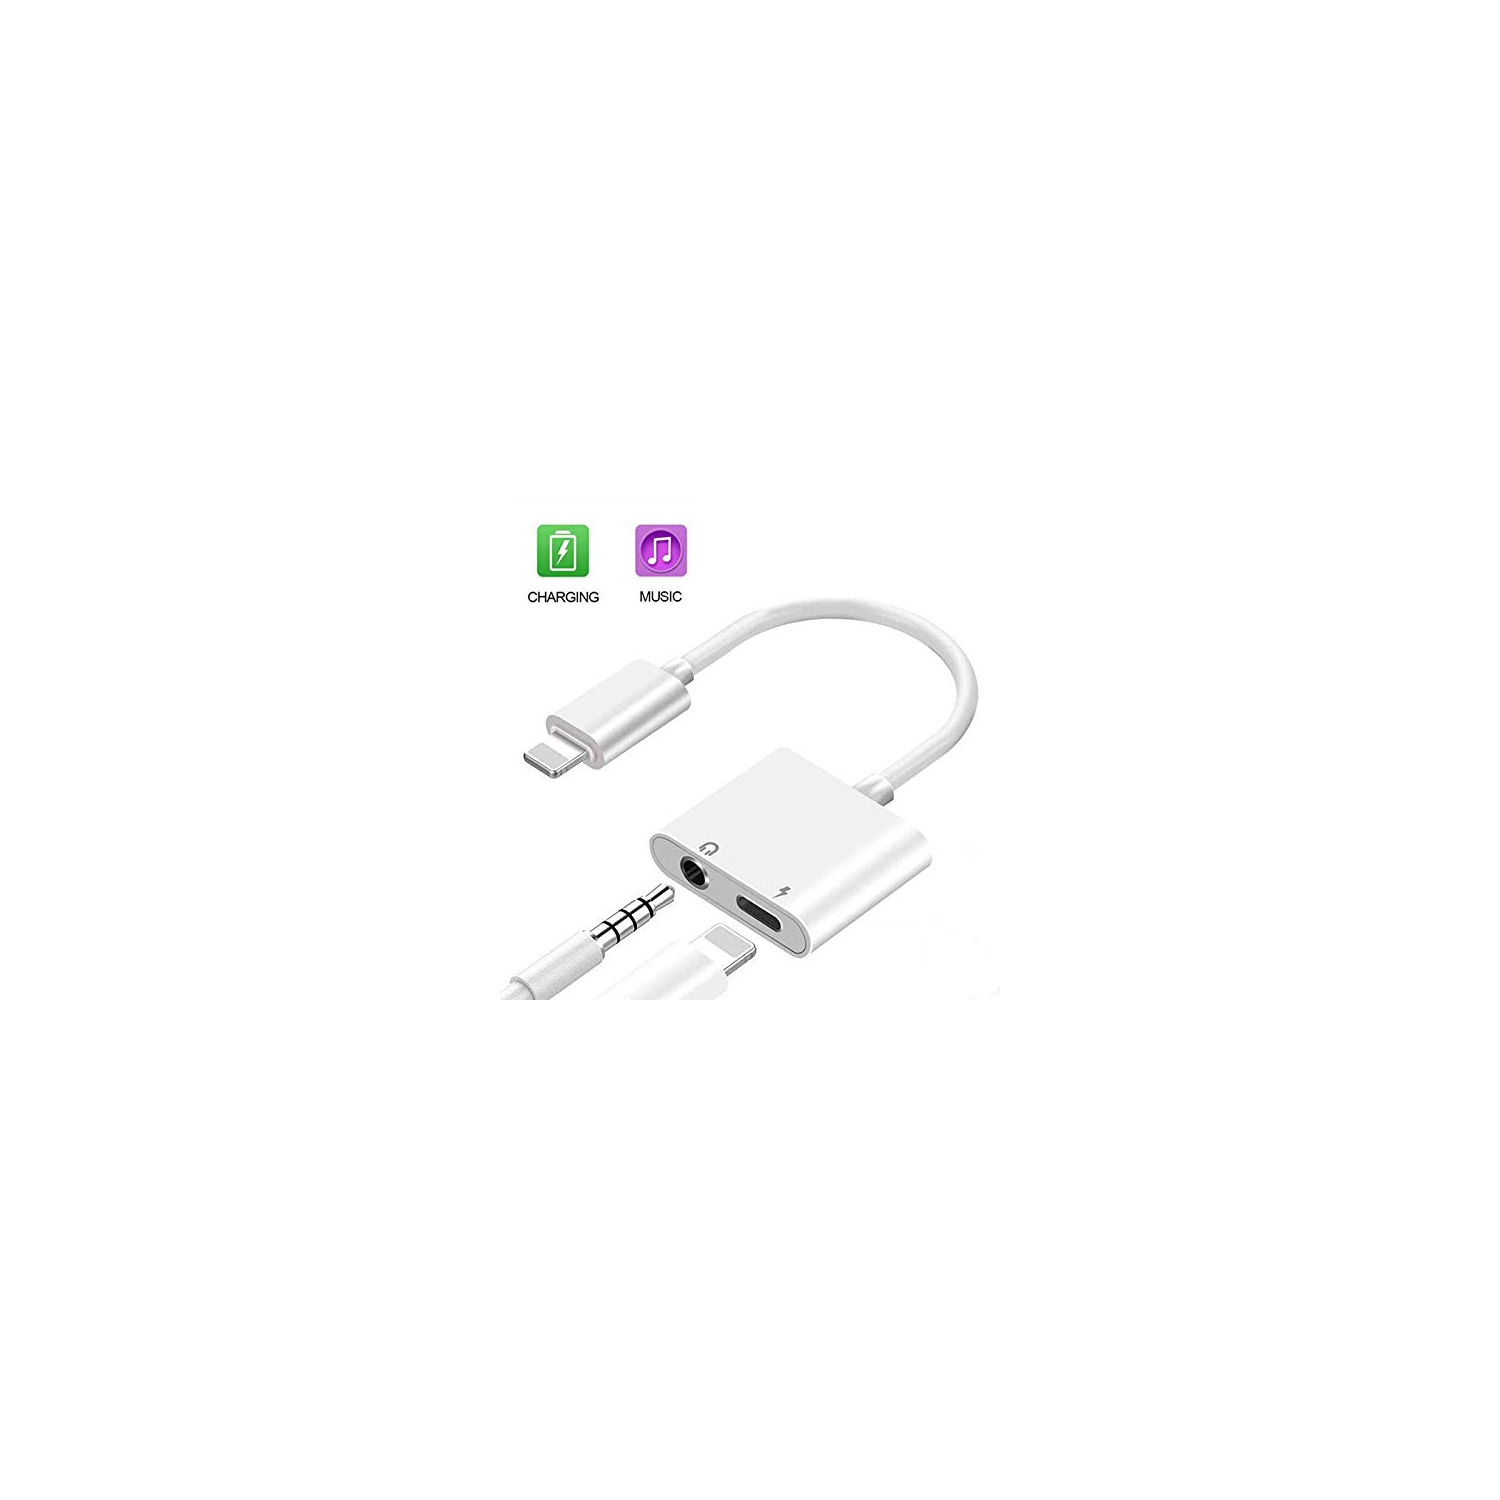 LIPTO 2 in 1 Lightning to 3.5mm Adapter Headphone Jack Splitter Cable For iPhone - Music Only